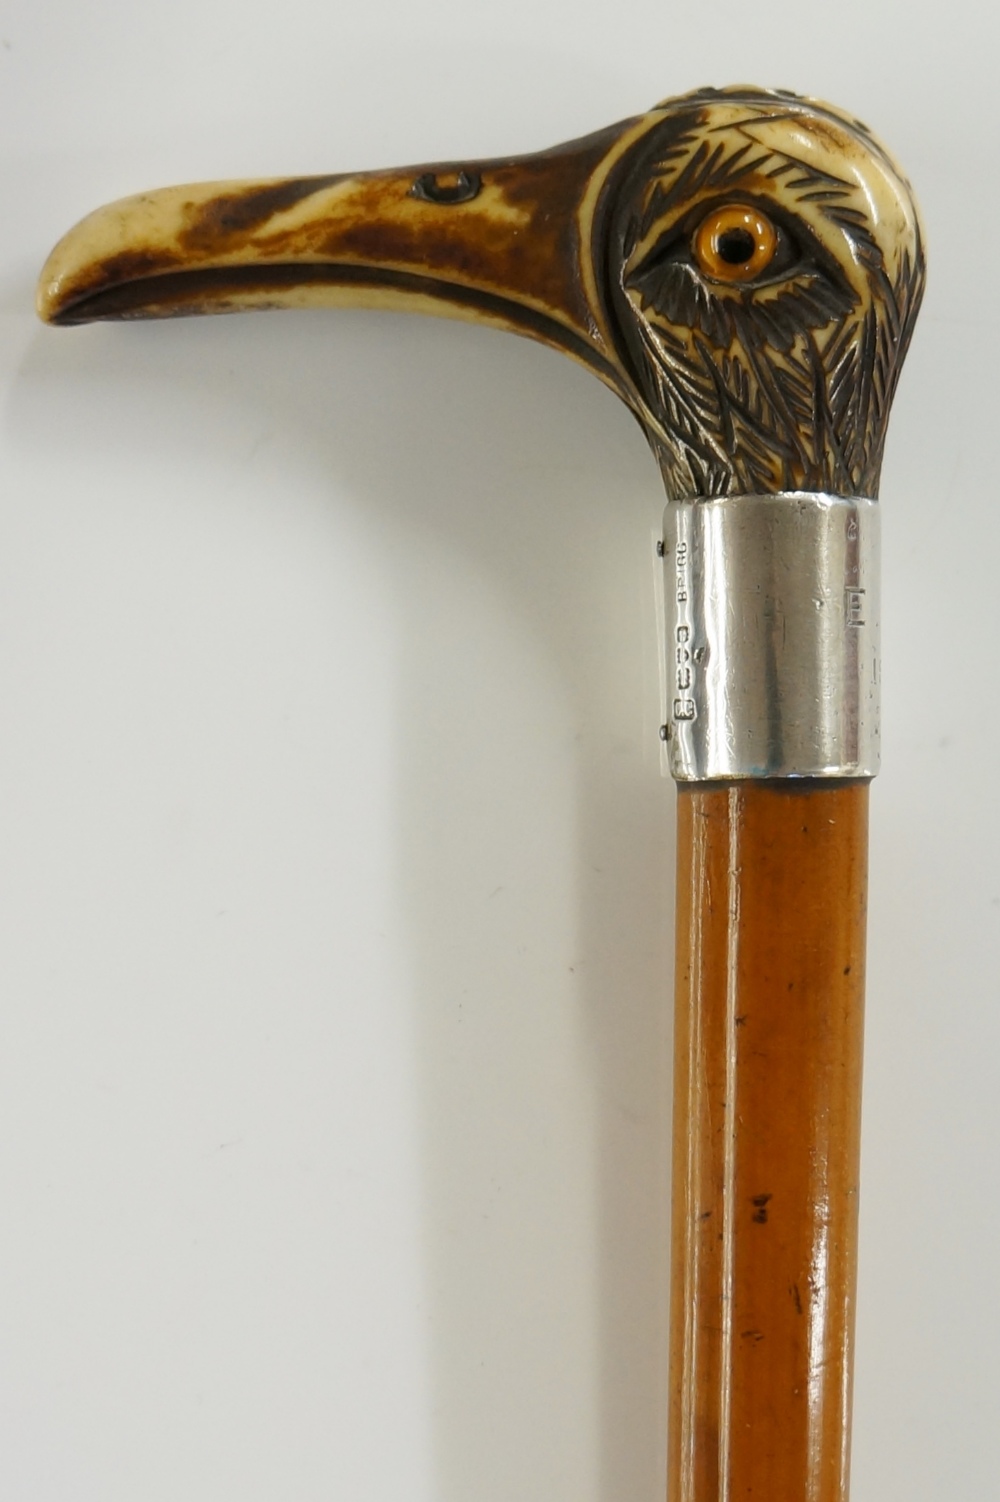 A Brigg of London antler topped walking stick carved in the form of a bird's head, - Image 3 of 3